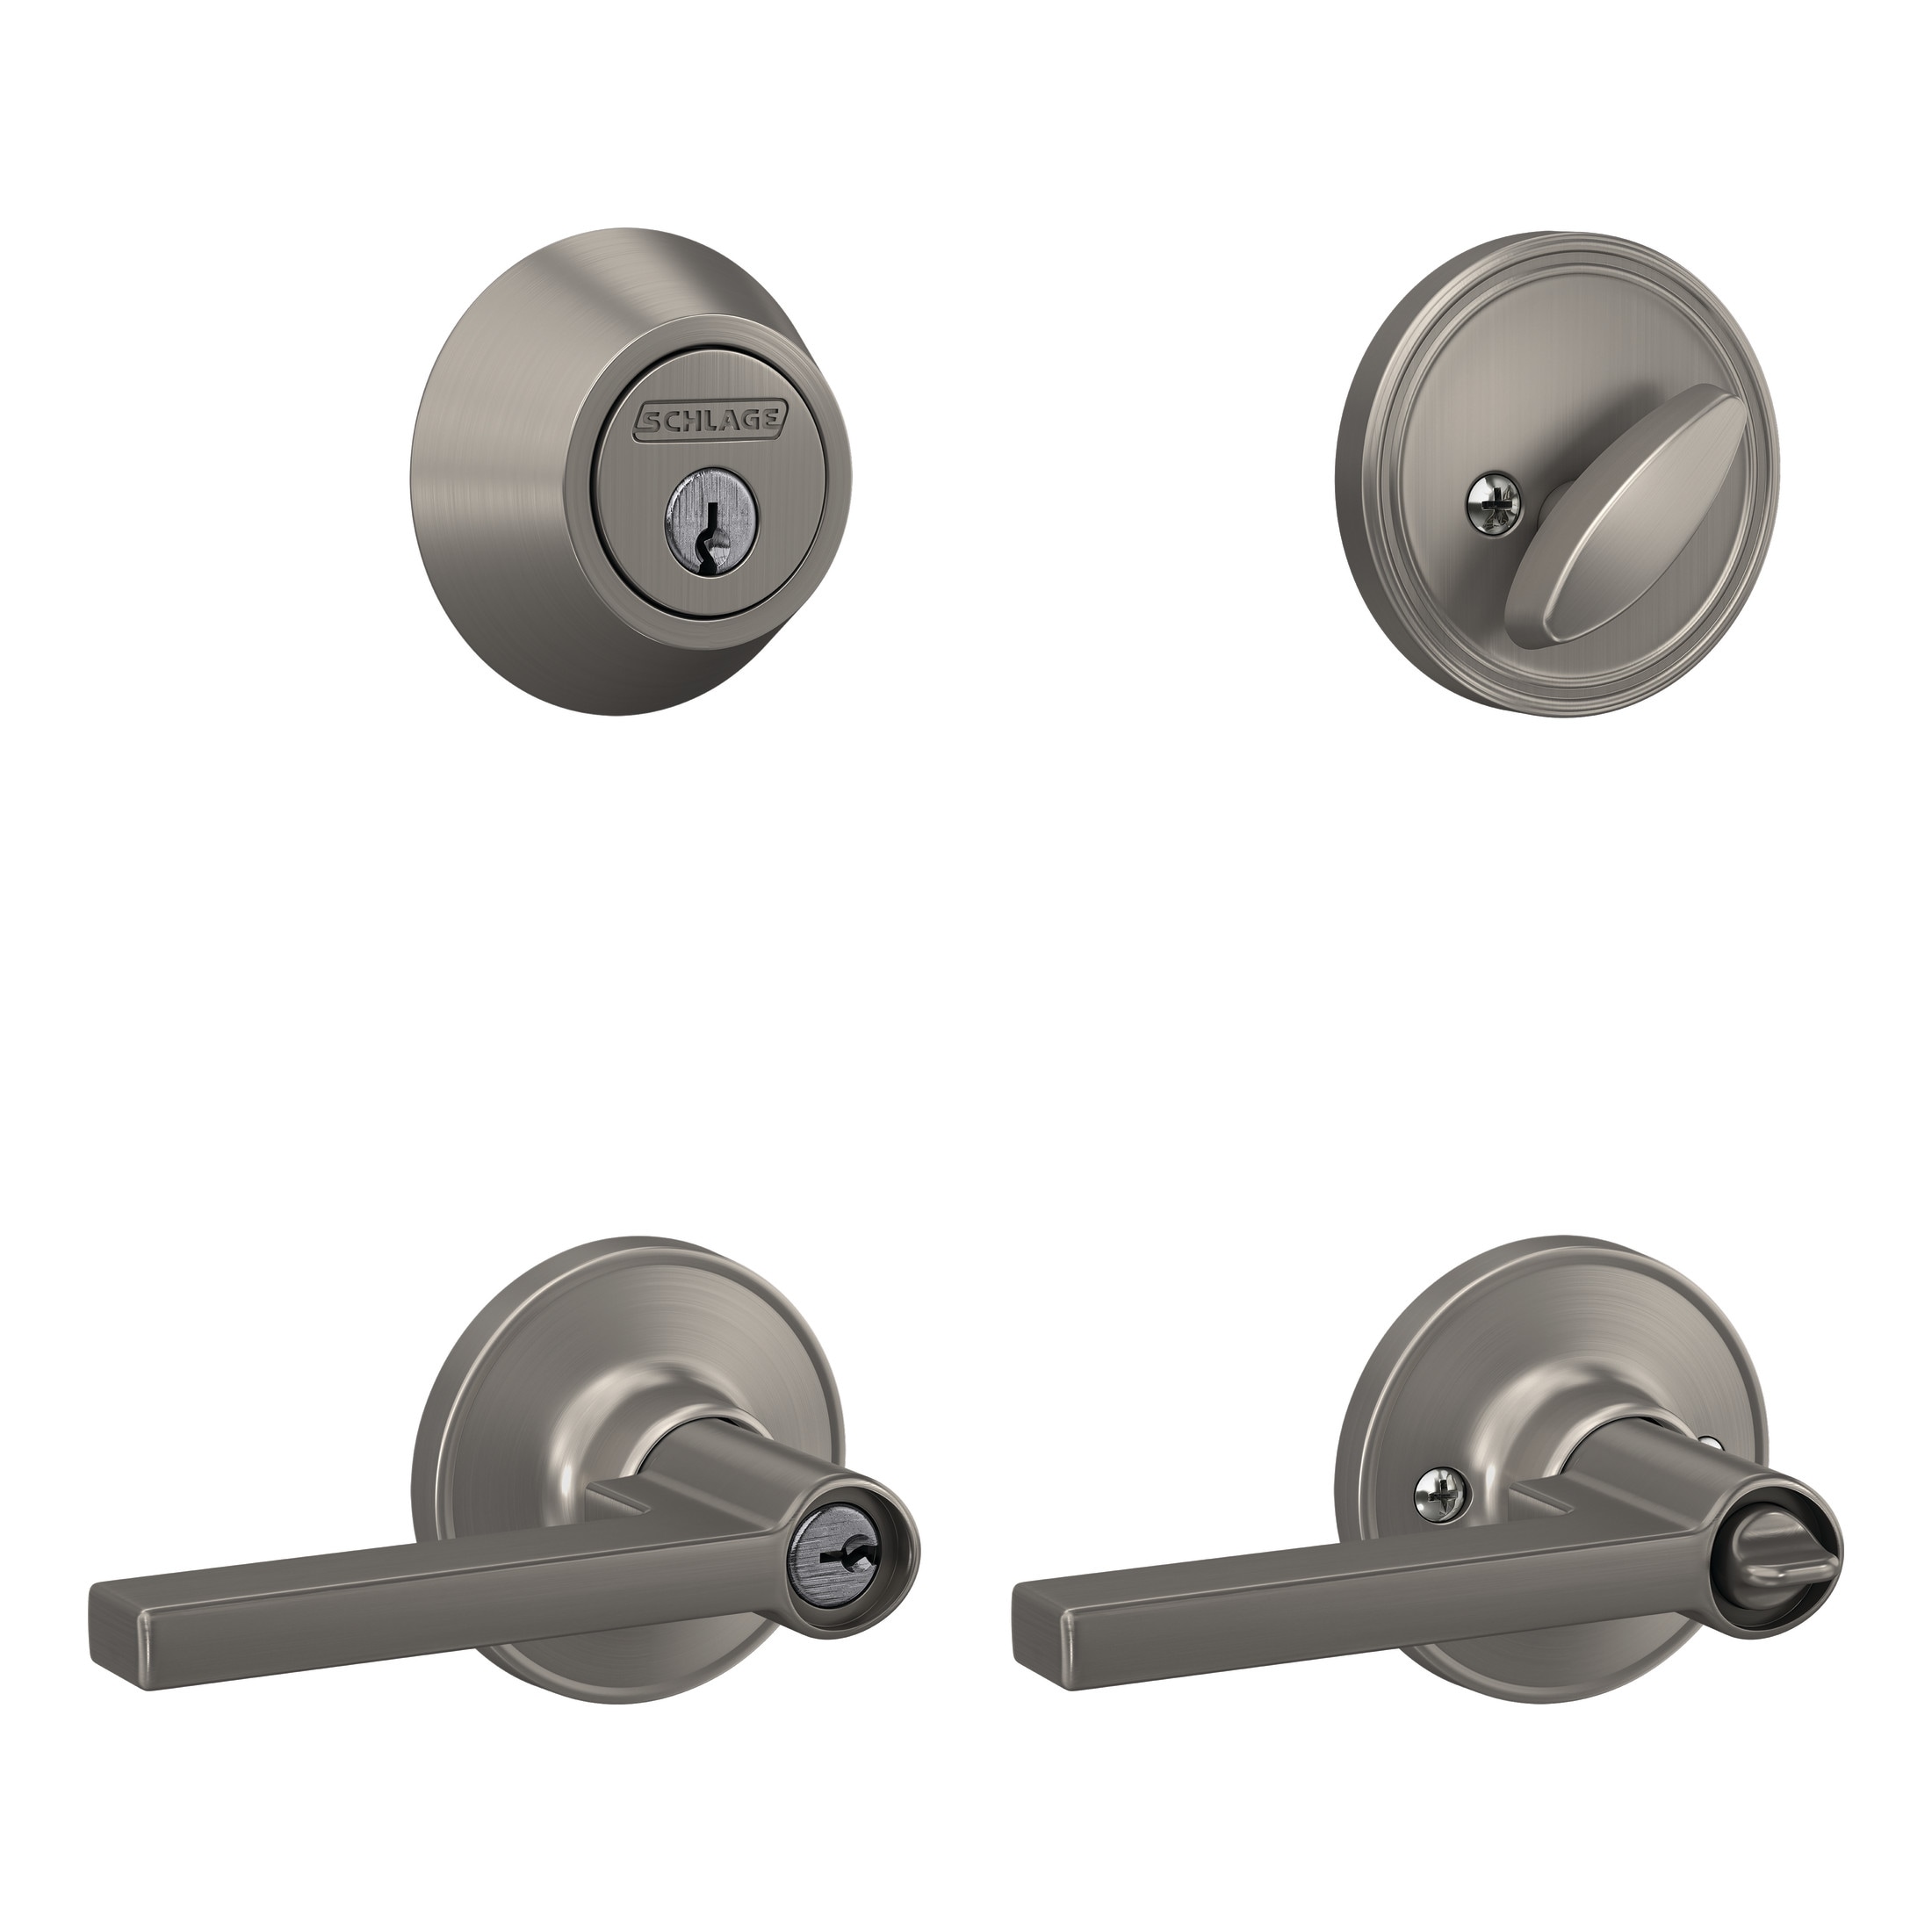 Satin Nickel Square Plate Entry Entrance keyed Levers Single Deadbolts combo 